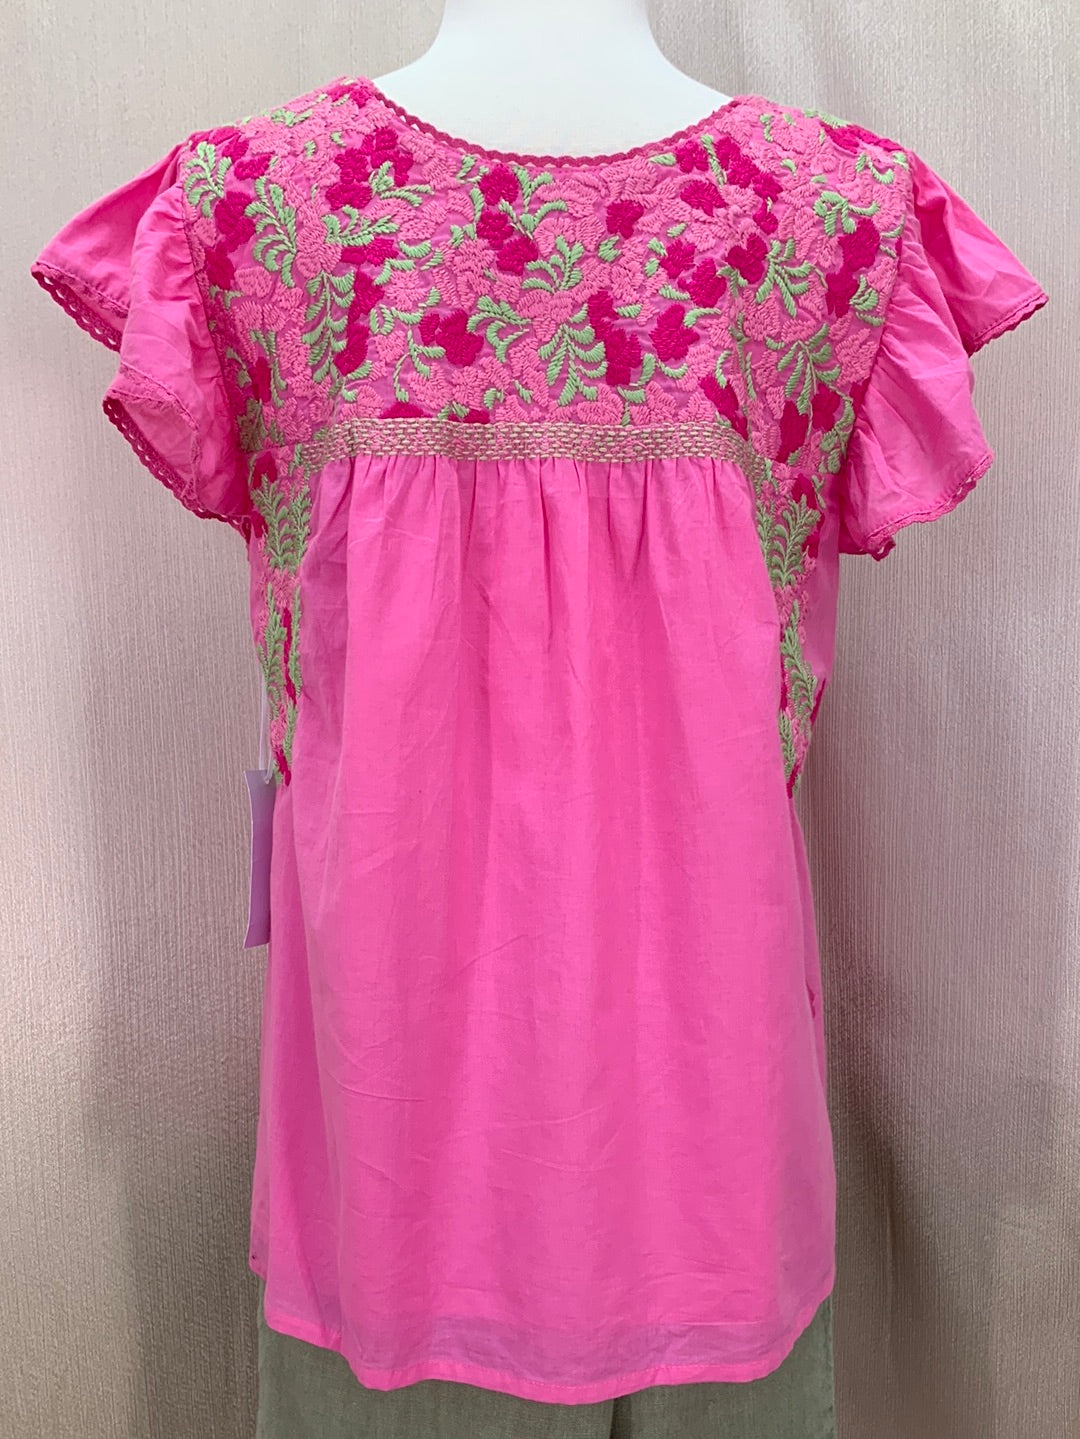 NWT - J MARIE pink green Embroidered Flutter Sleeve Lined Kehlani Top - M